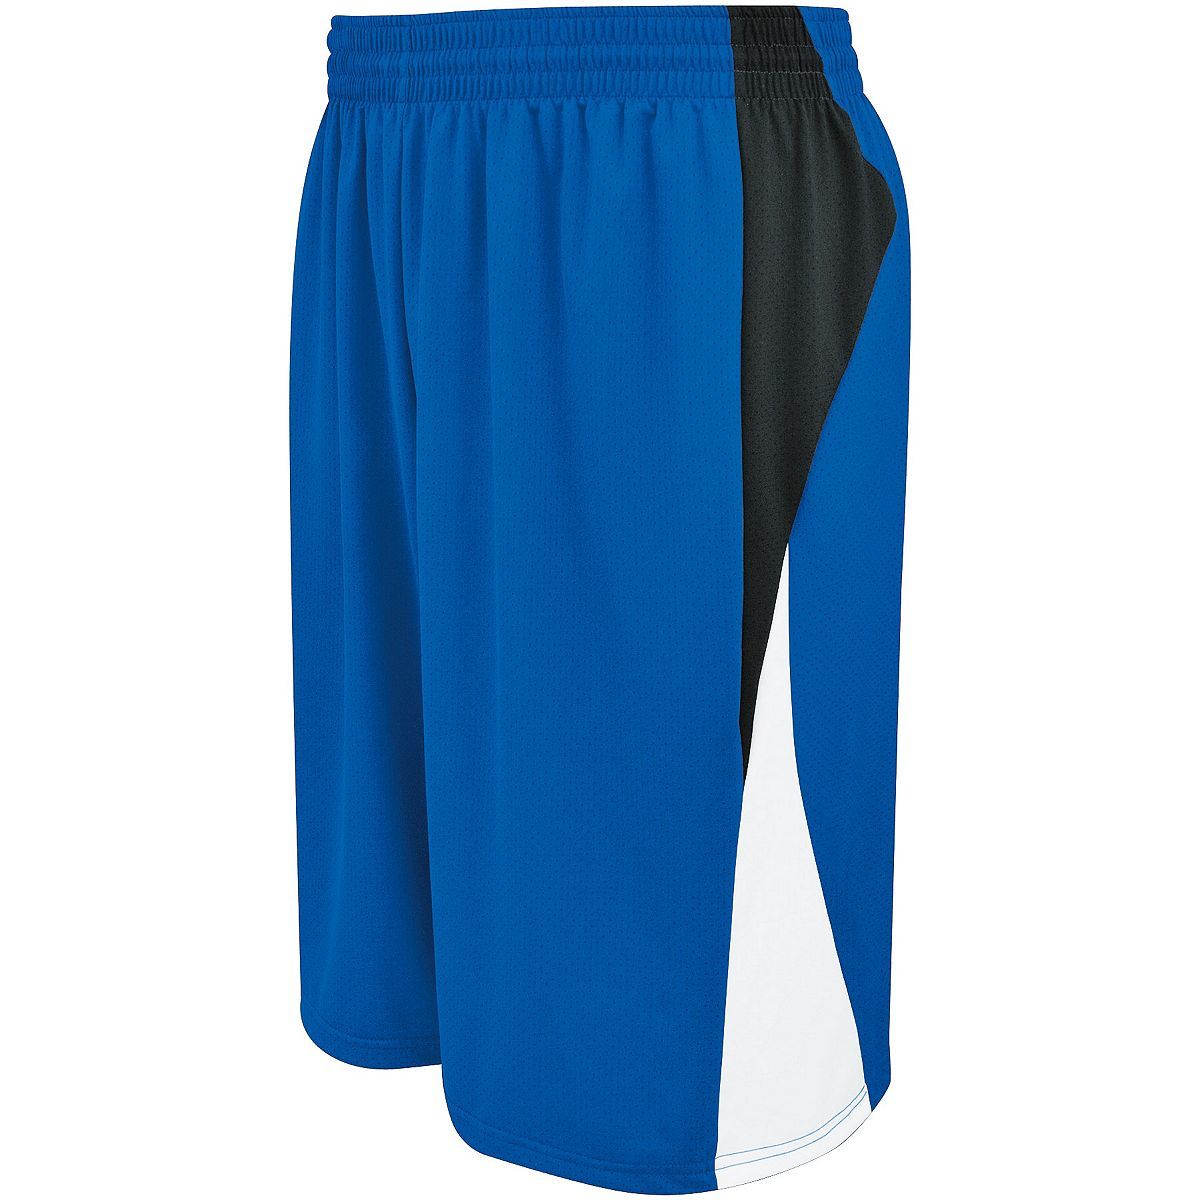 Holloway Campus Reversible Shorts in Royal/Black/White  -Part of the Adult, Adult-Shorts, Basketball, Holloway, All-Sports, All-Sports-1 product lines at KanaleyCreations.com